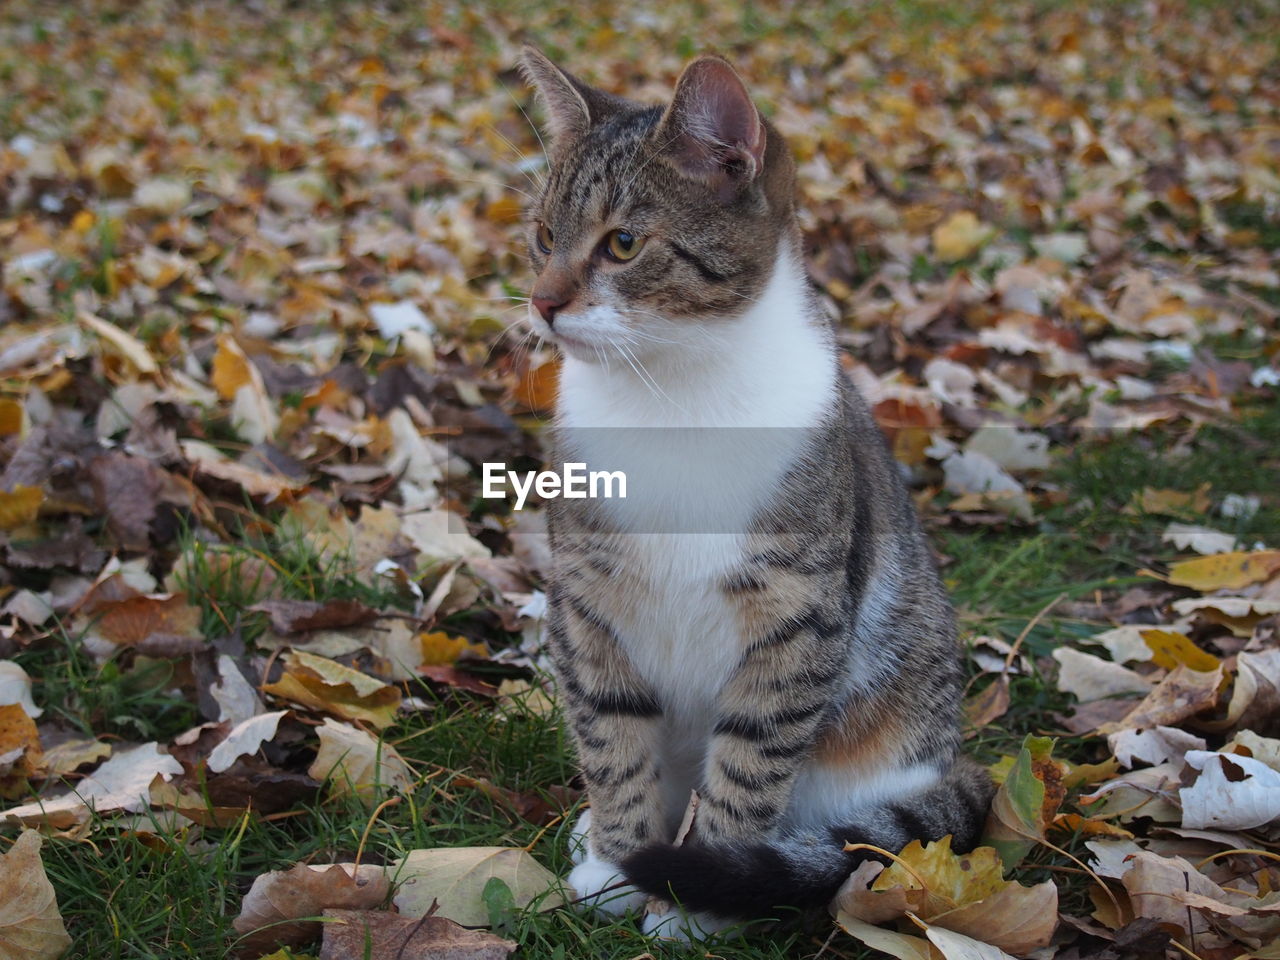 Close-up of cat sitting on autumn leaves